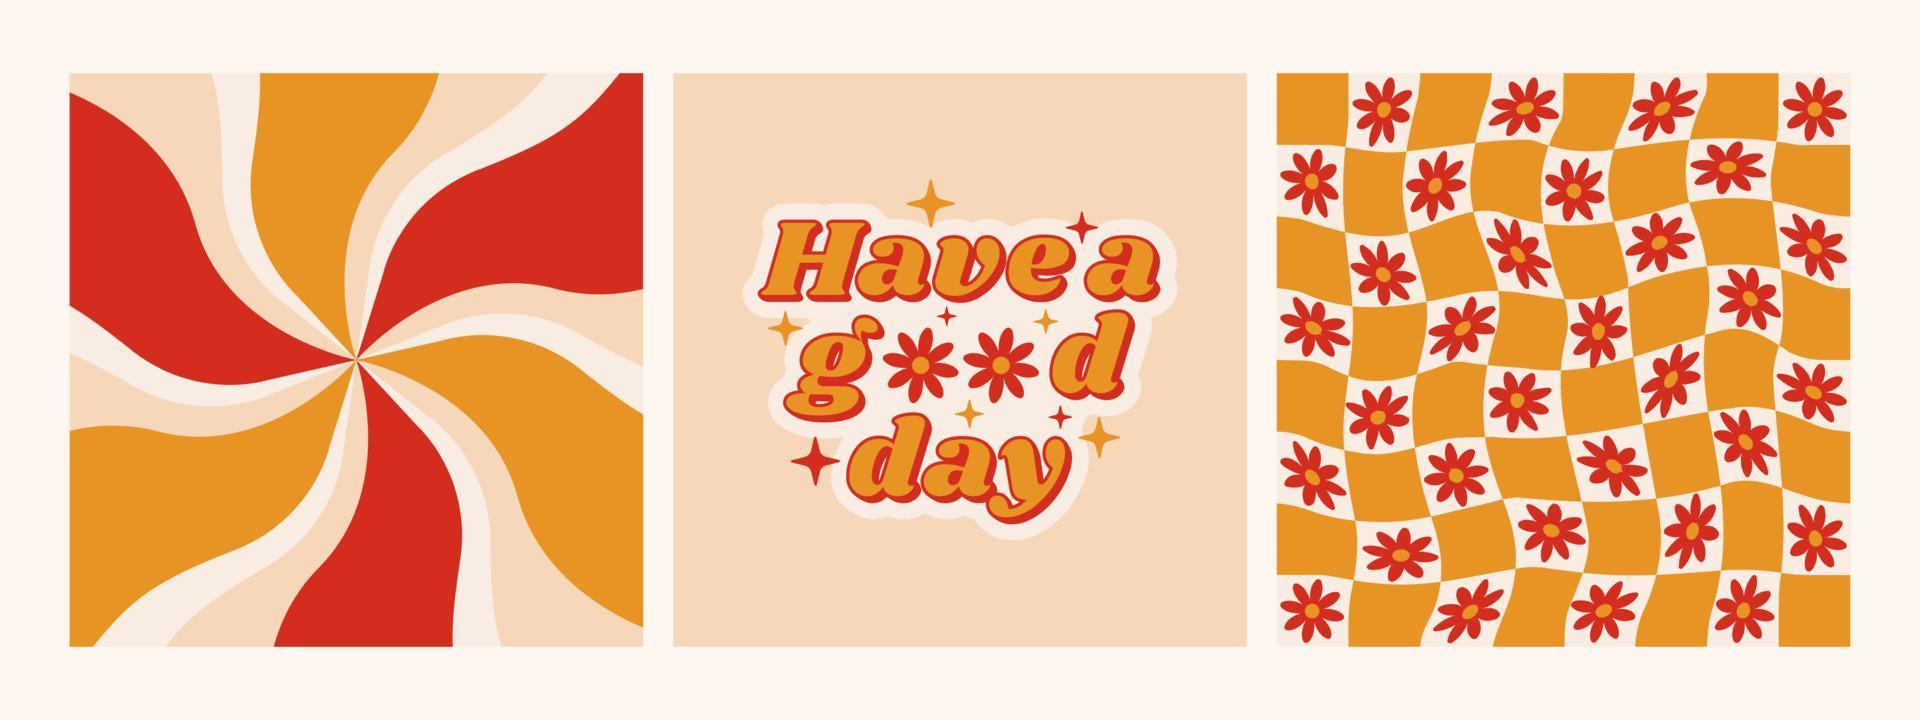 Hippie retro 70s poster collection. Have a good day positive slogan with checkered floral background. vector